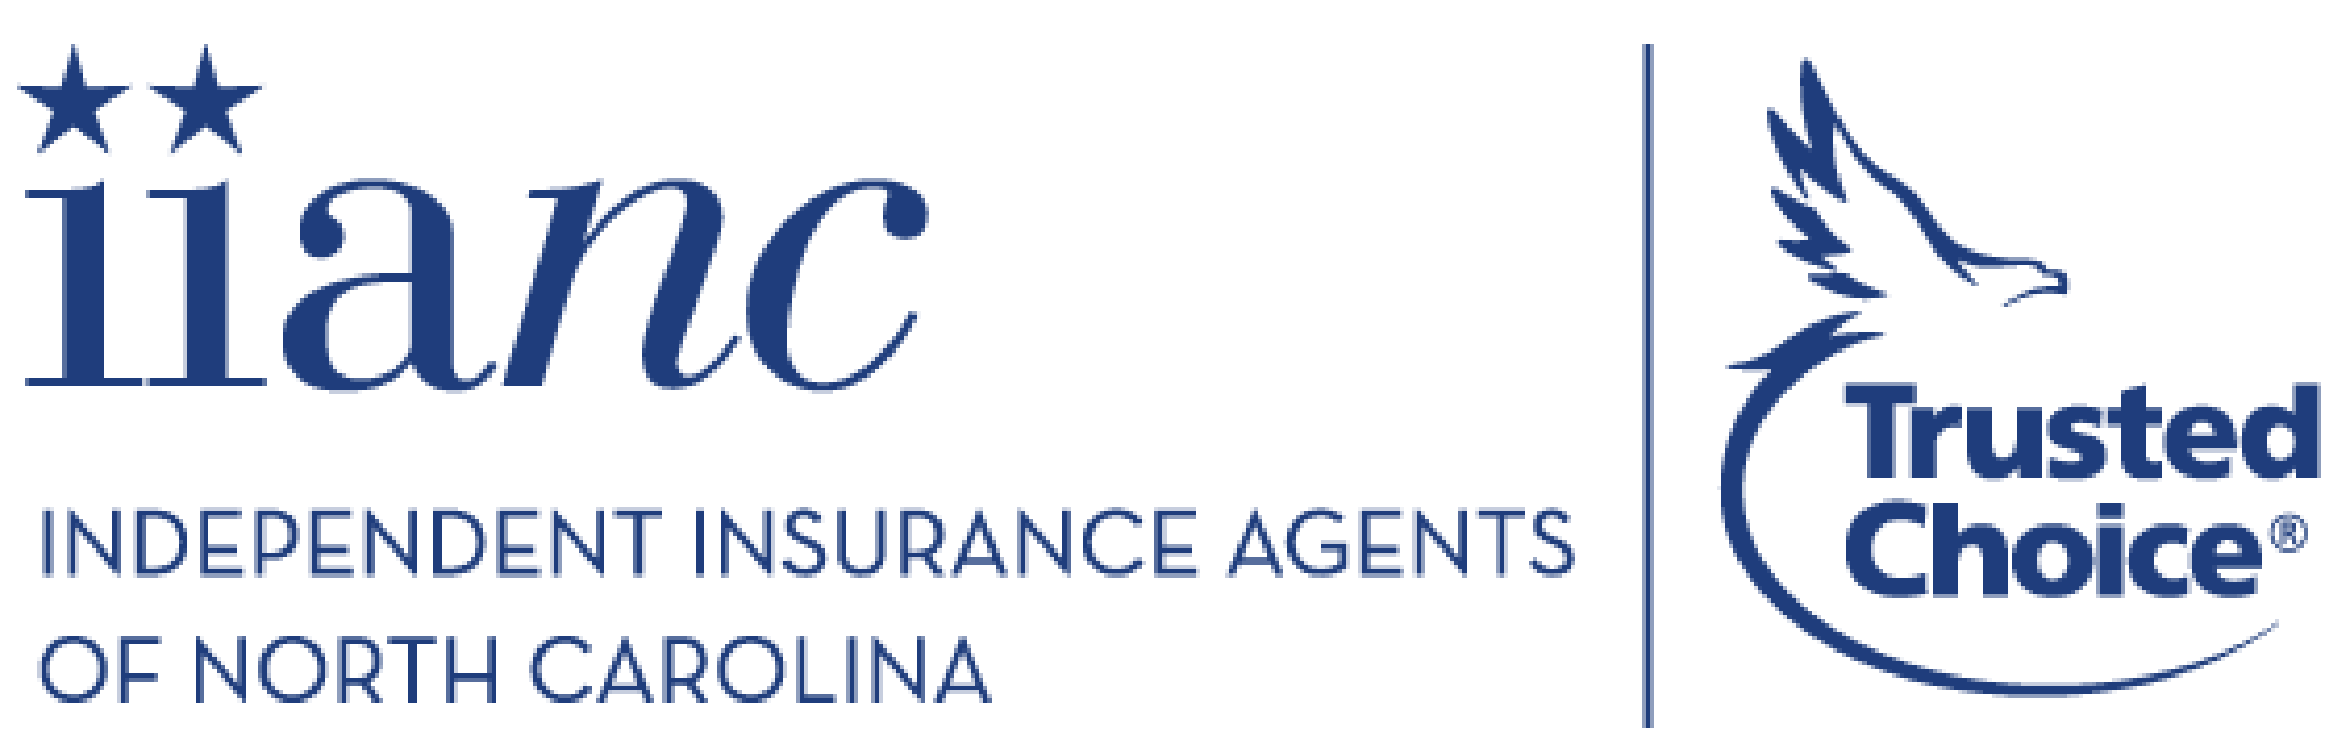 The Insurance Agents of North Carolina (IIANC) Partners with RPost to Promote Use of RMail Amongst its Members